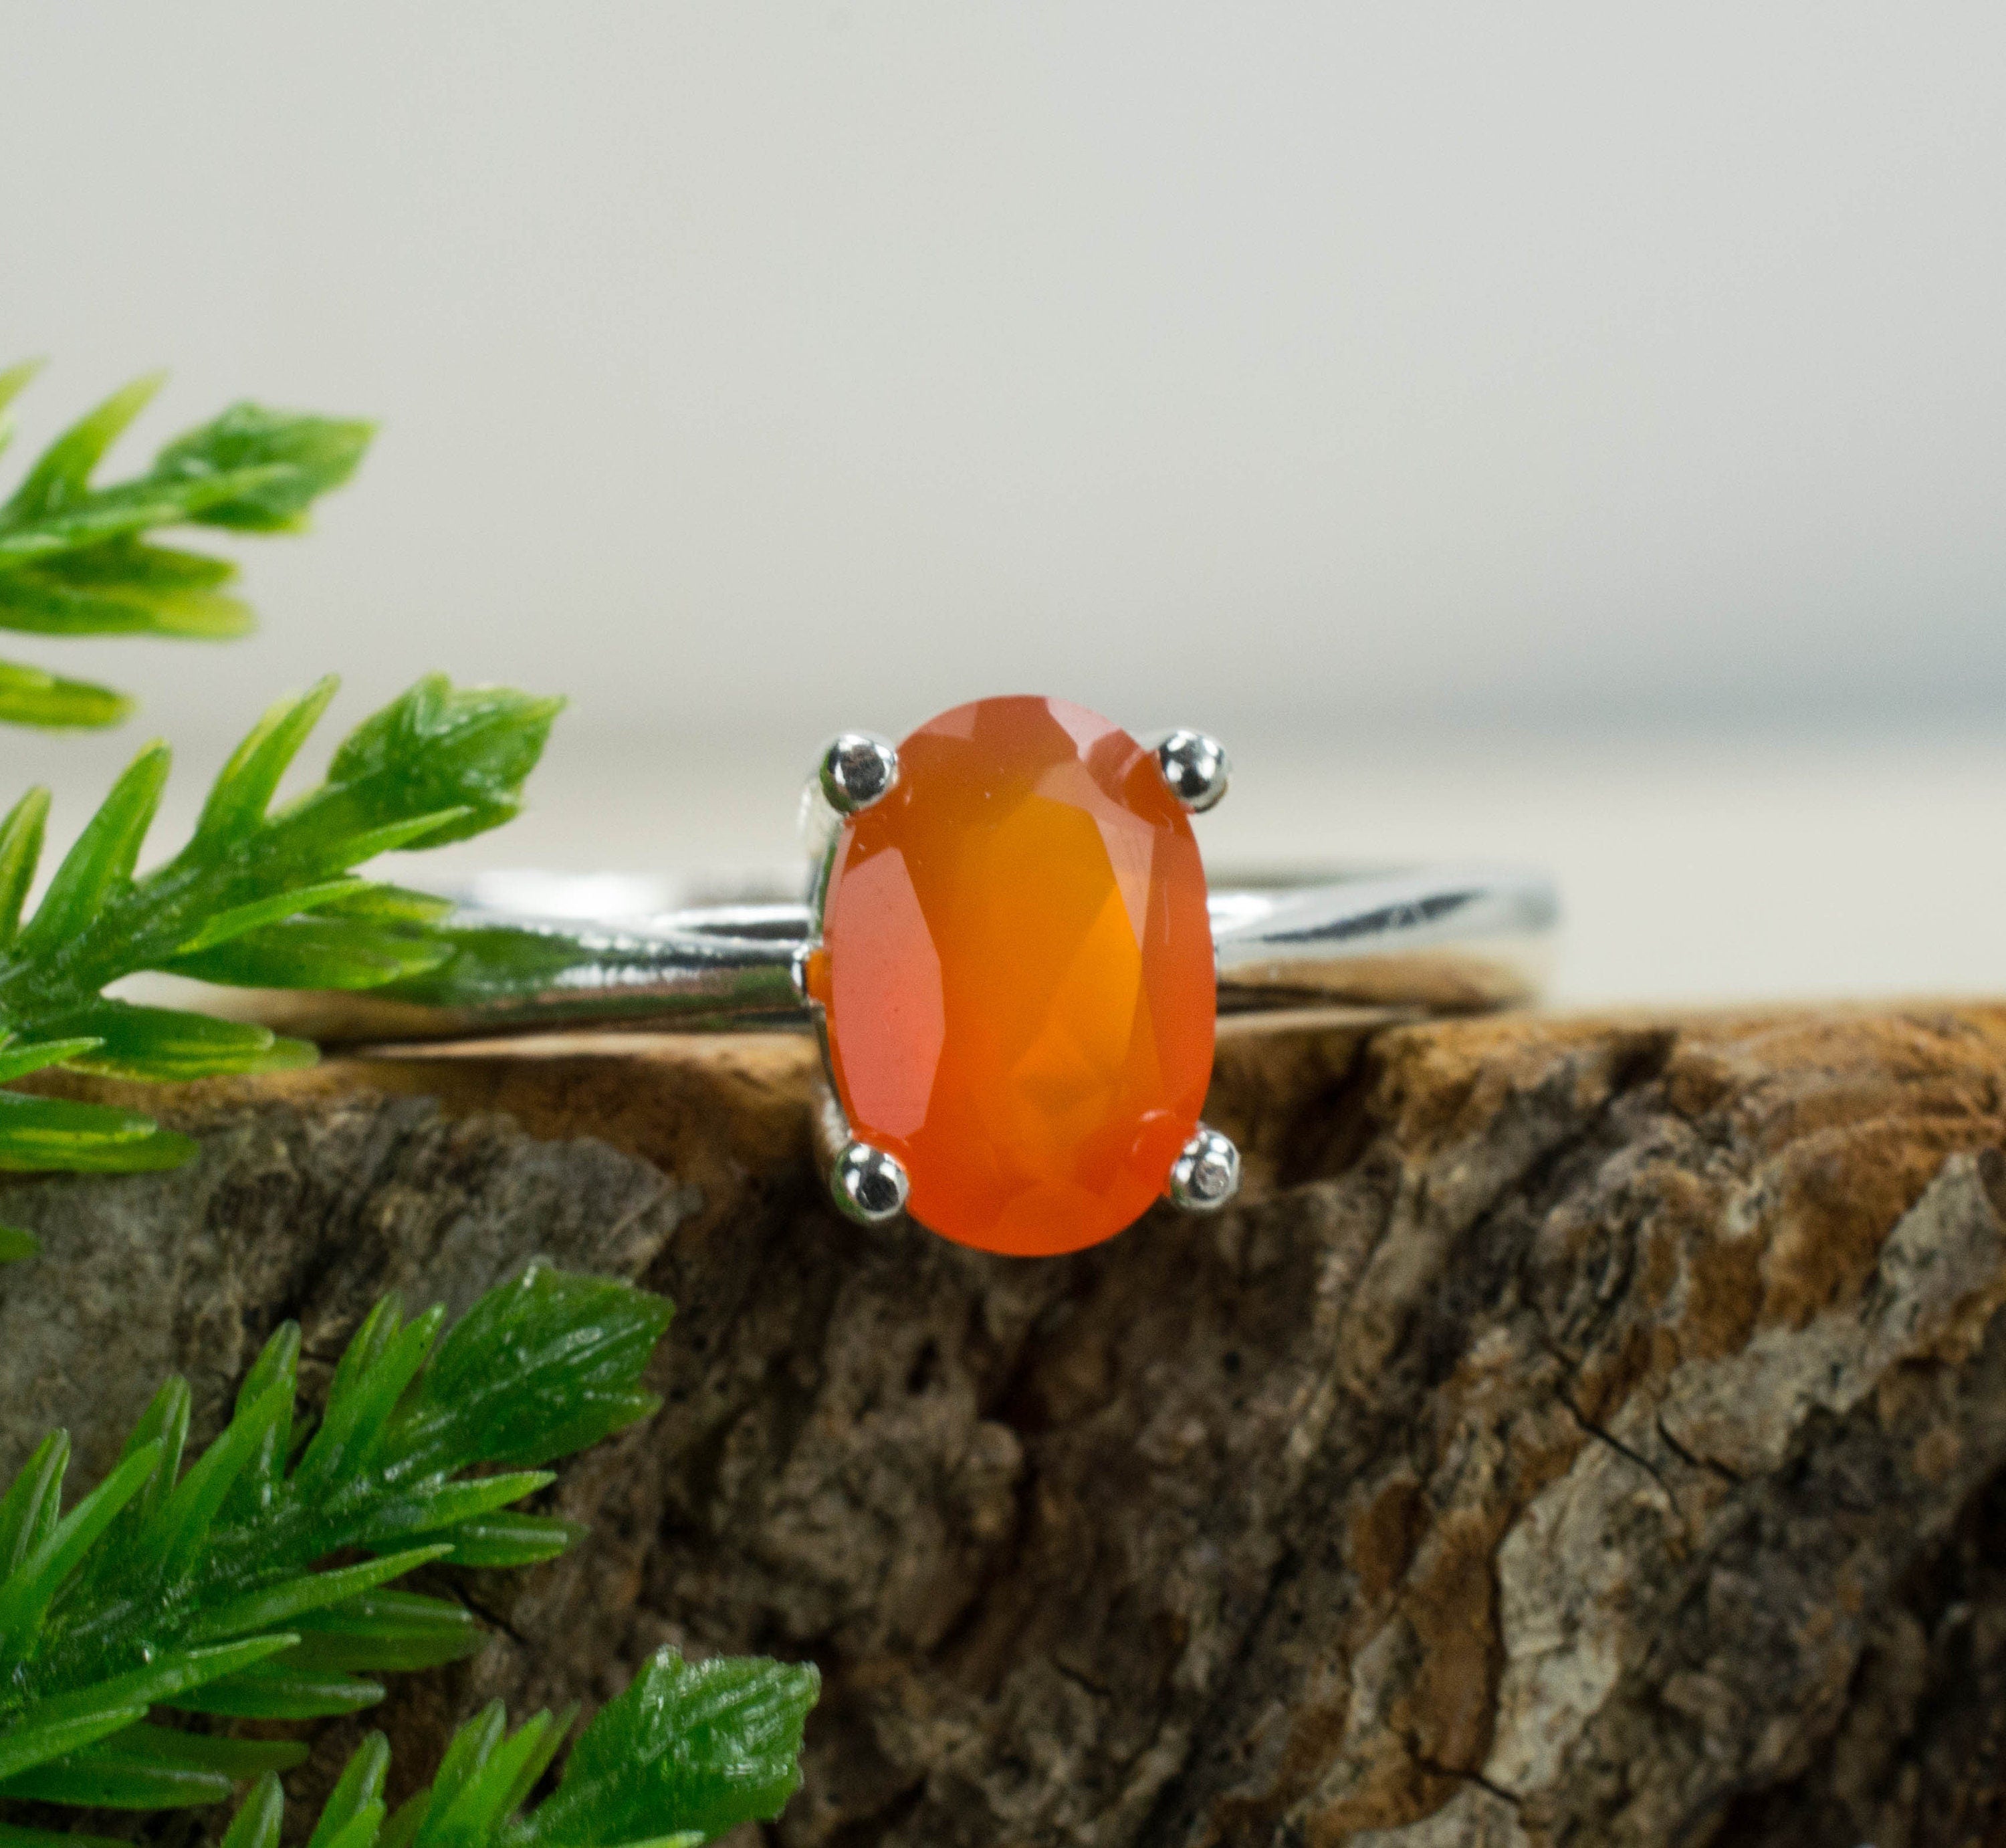 Carnelian Sterling Silver Ring, Genuine Untreated India Carnelian - Mark Oliver Gems